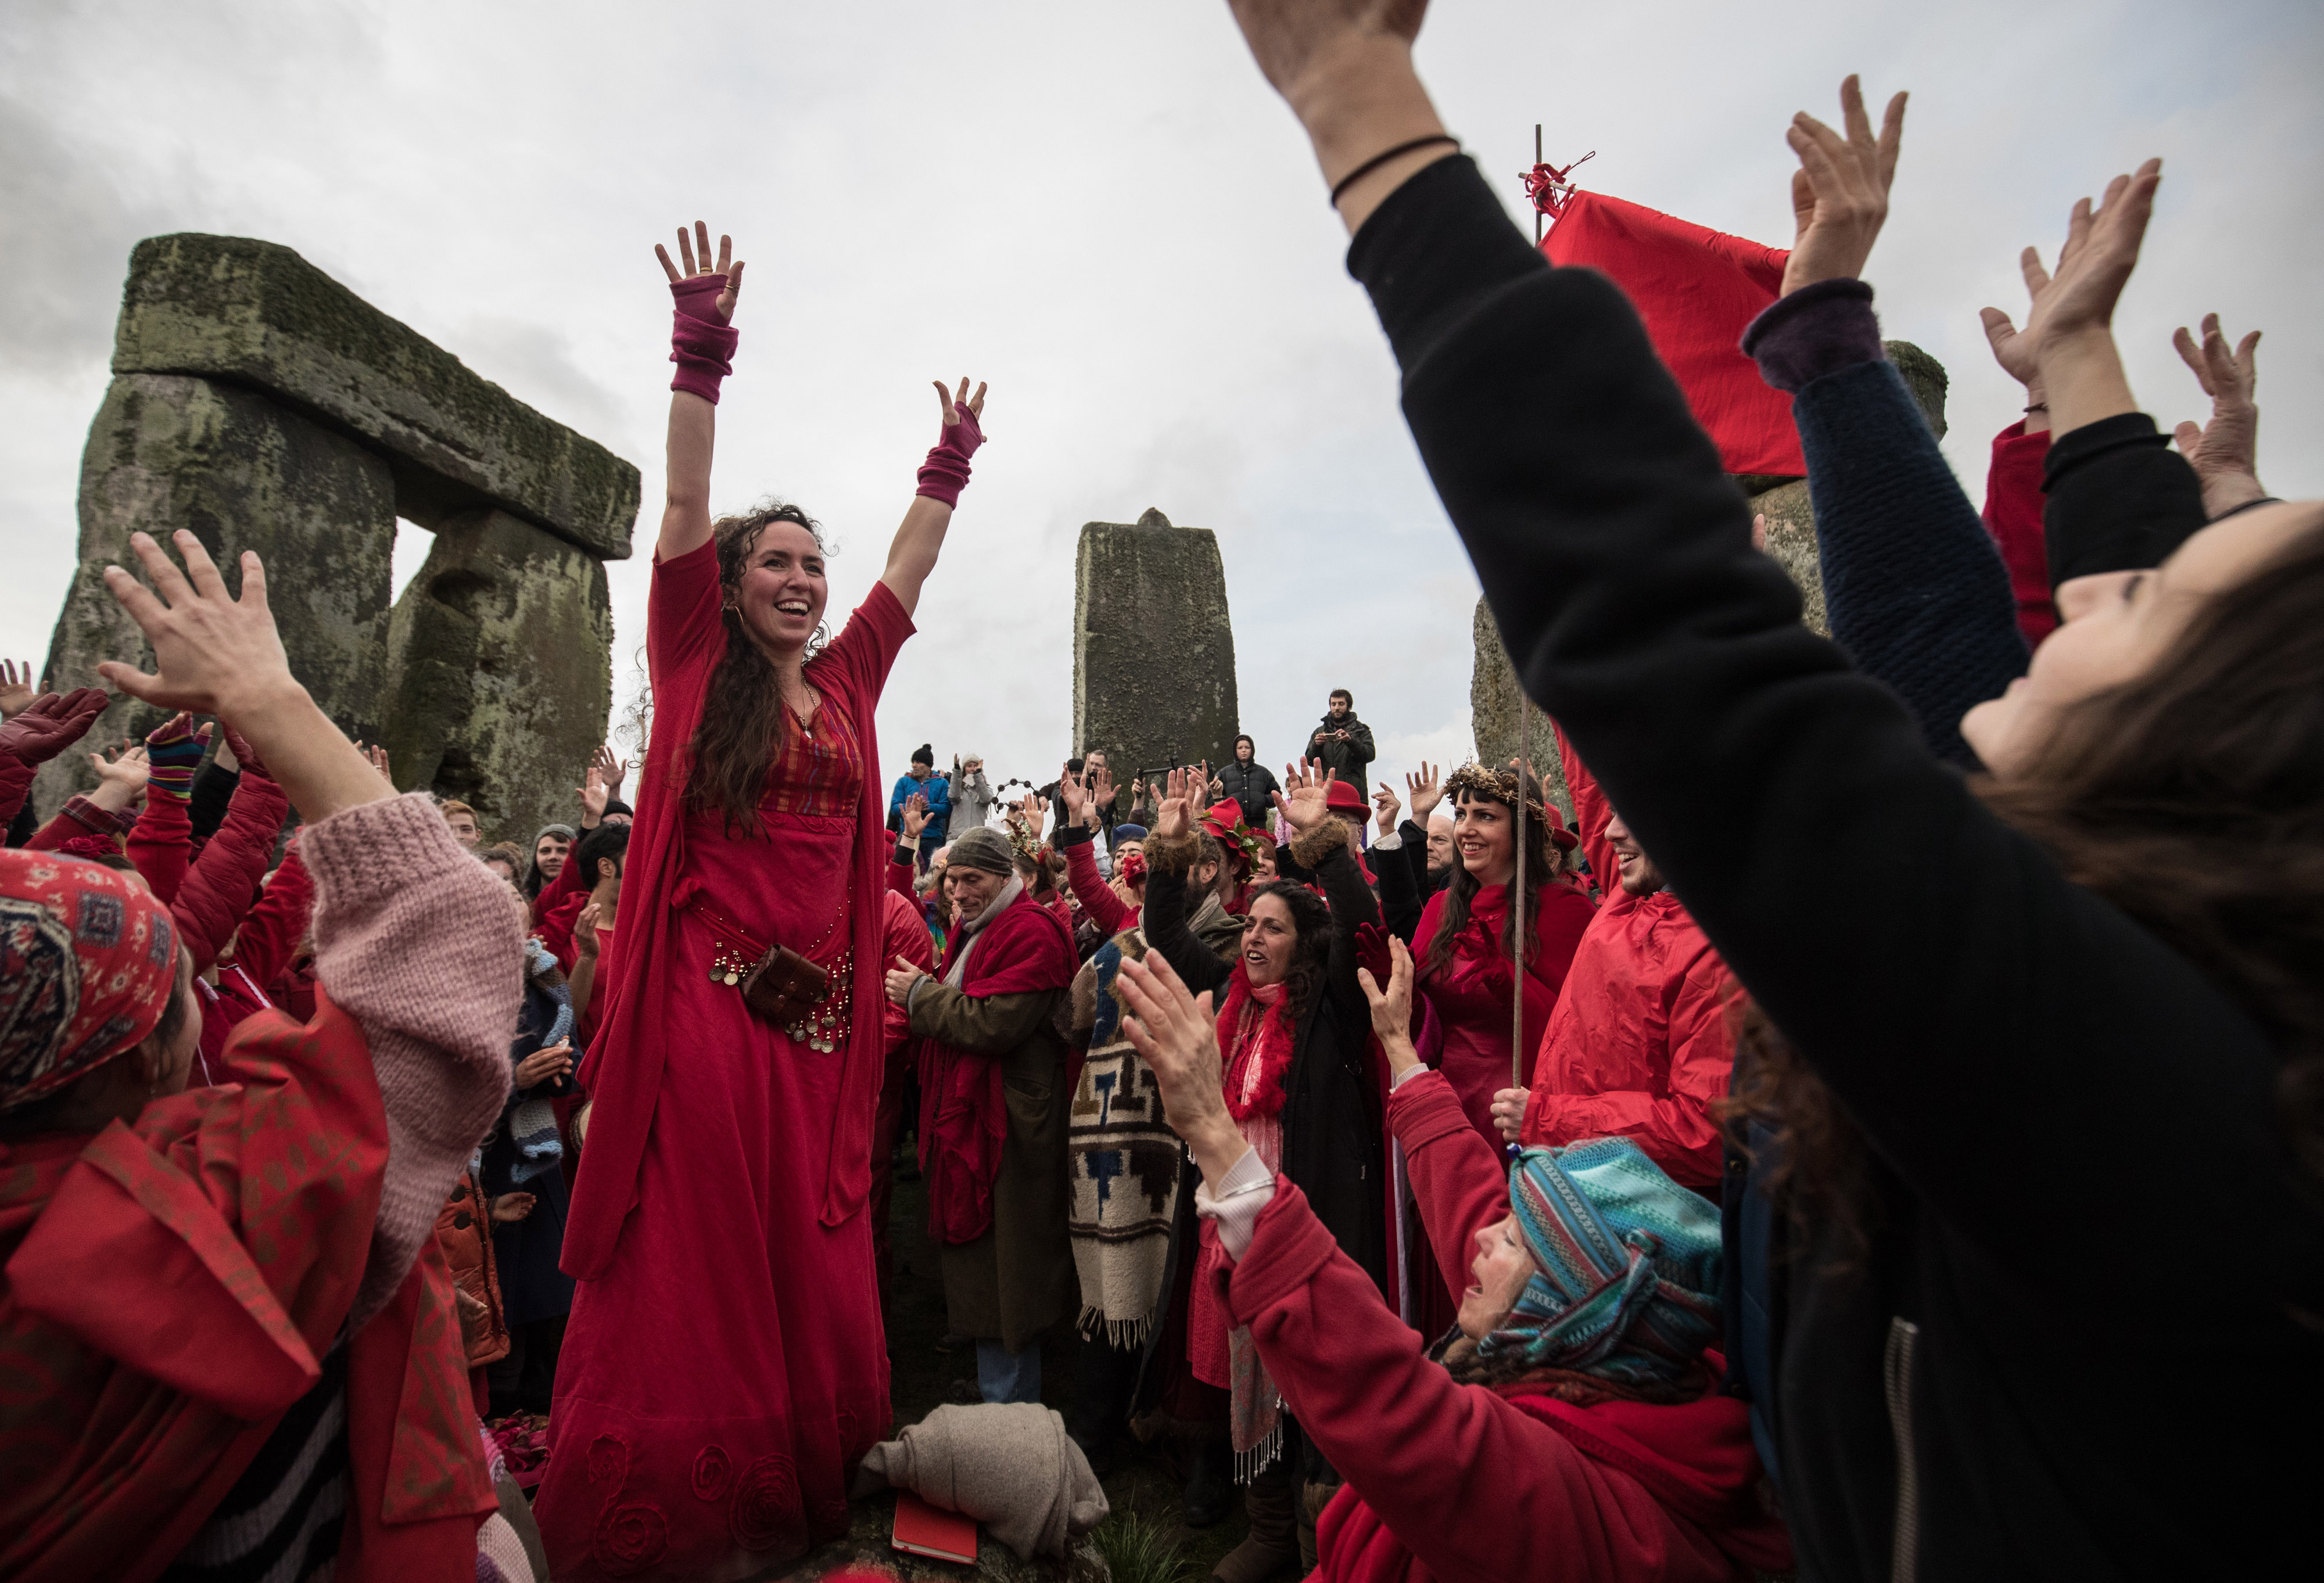 Members of the Shakti Sings choir sing as druids, pagans and revelers gather in the center of Stonehenge in Wiltshire, England to celebrate the 2016 winter solstice. (Matt Cardy—Getty Images)